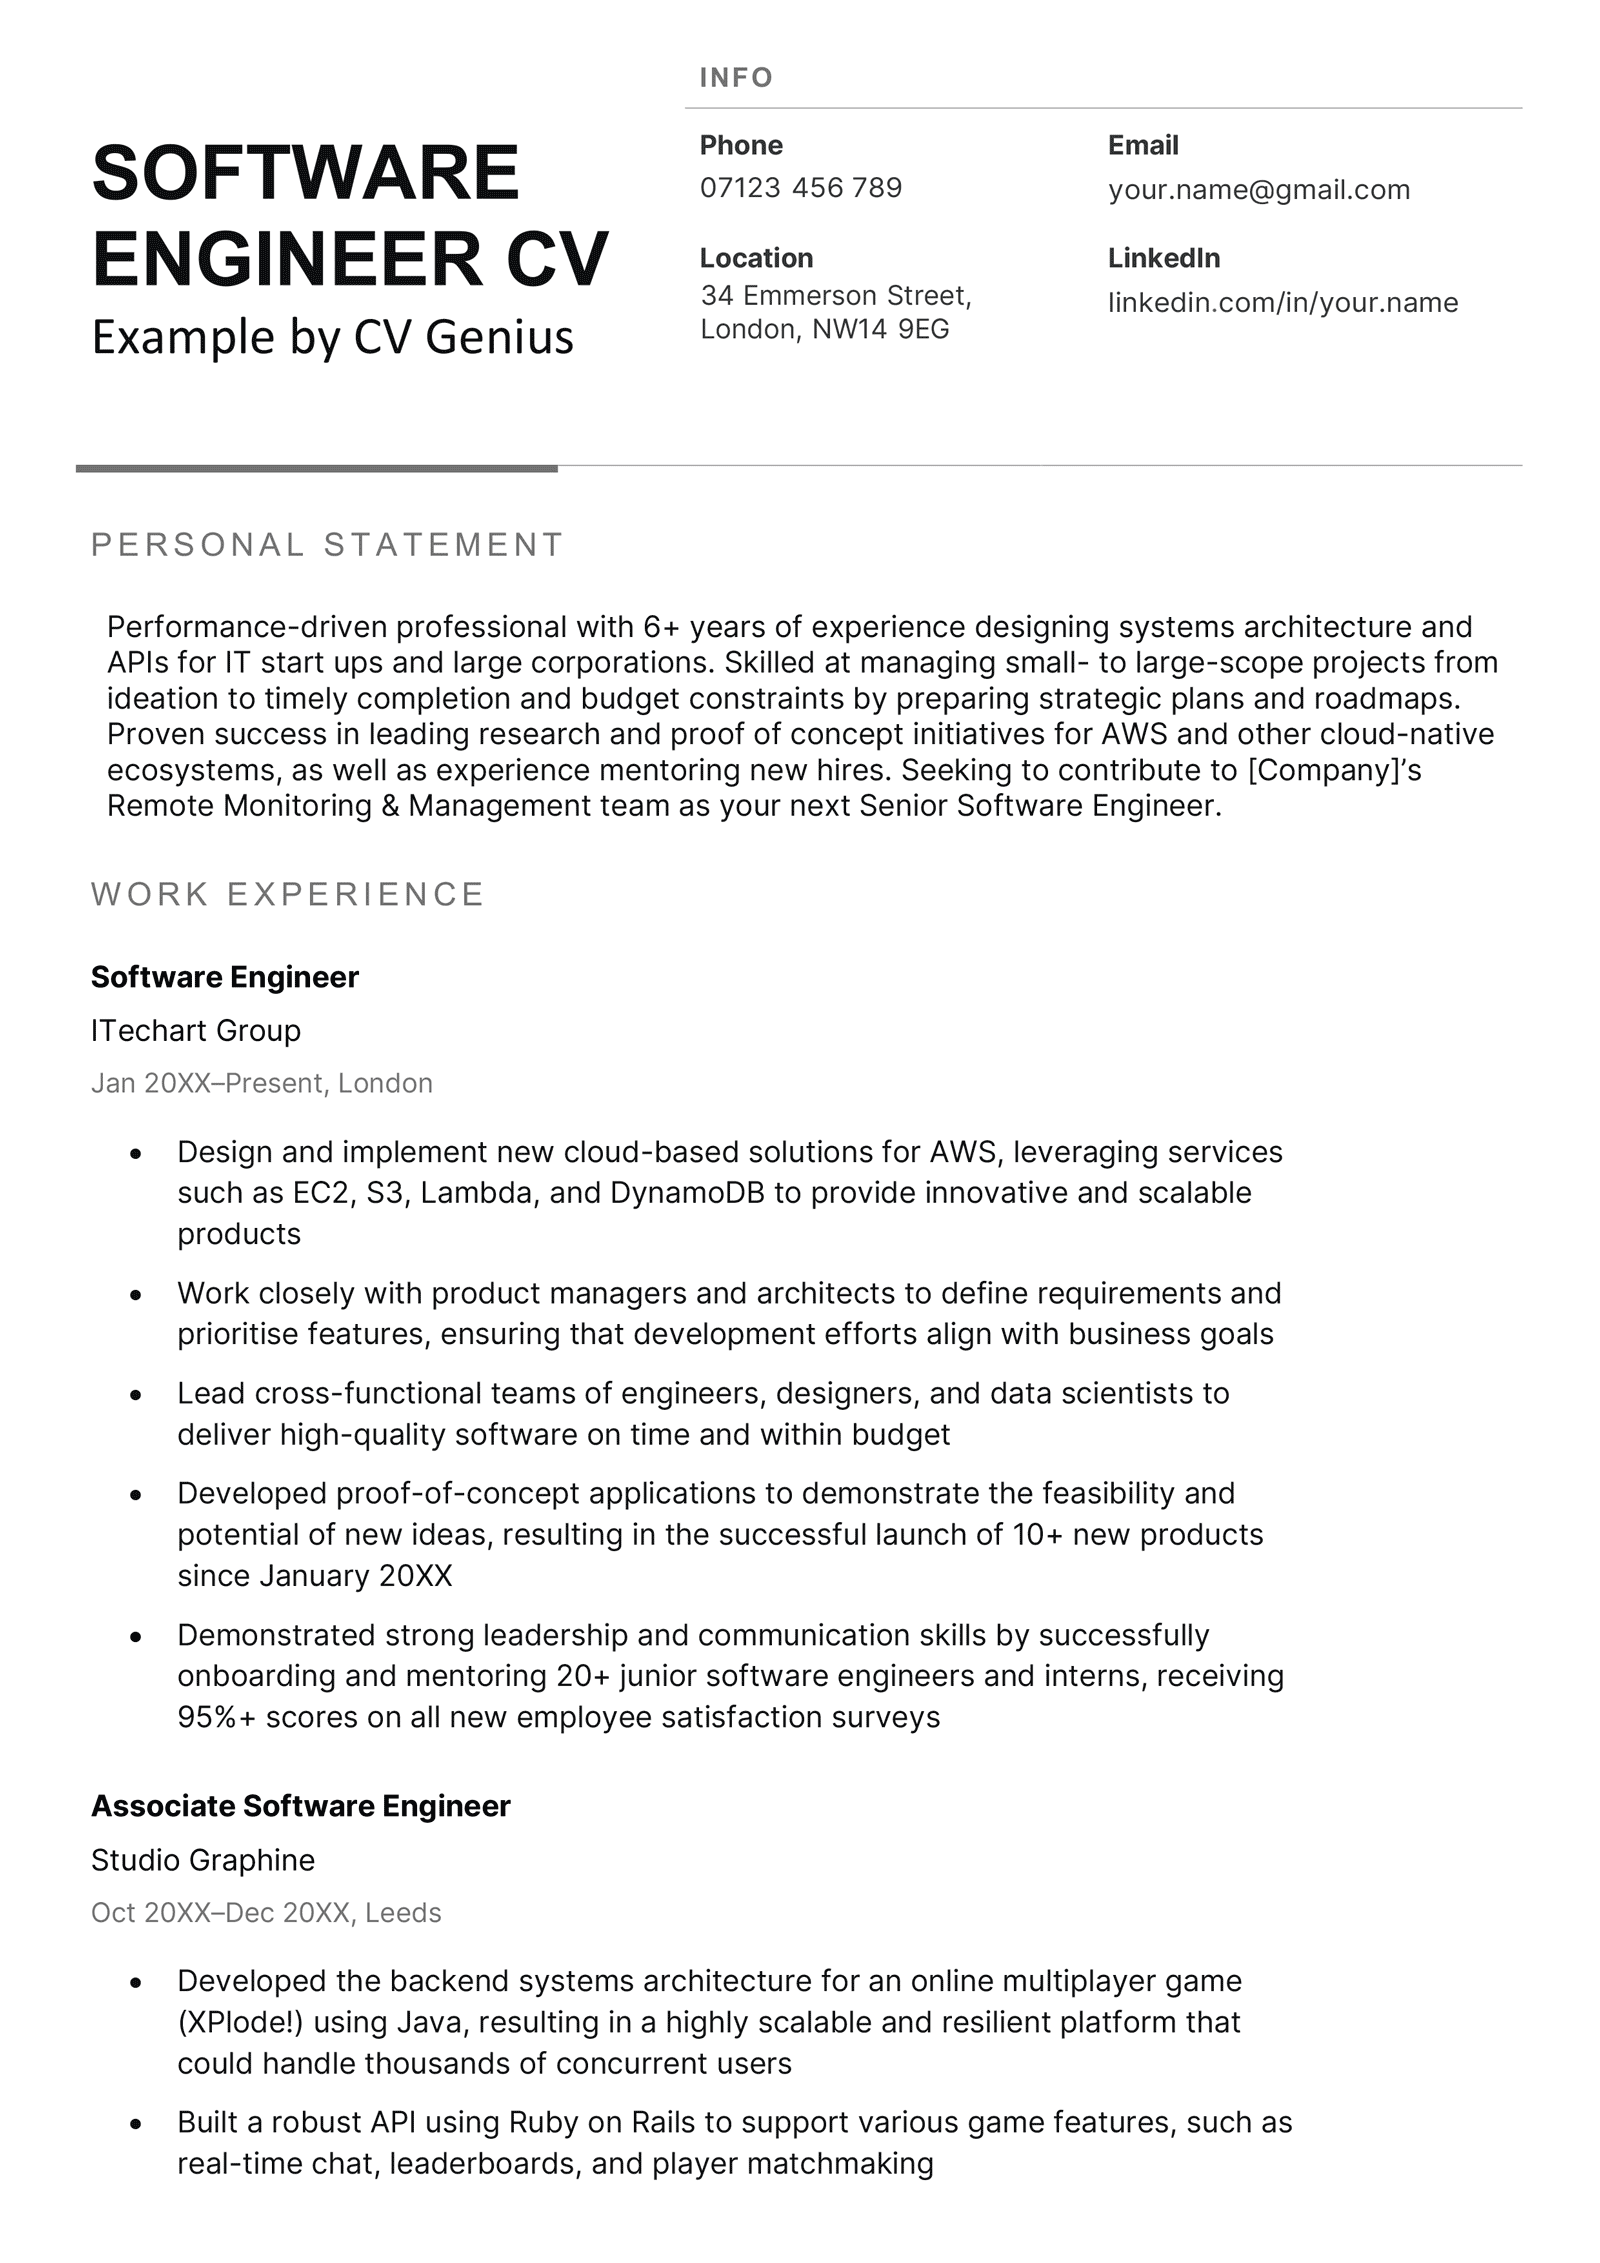 The first page of a software engineer CV example with bold black header text and sections for the applicant's personal statement, contact information, and work experience.